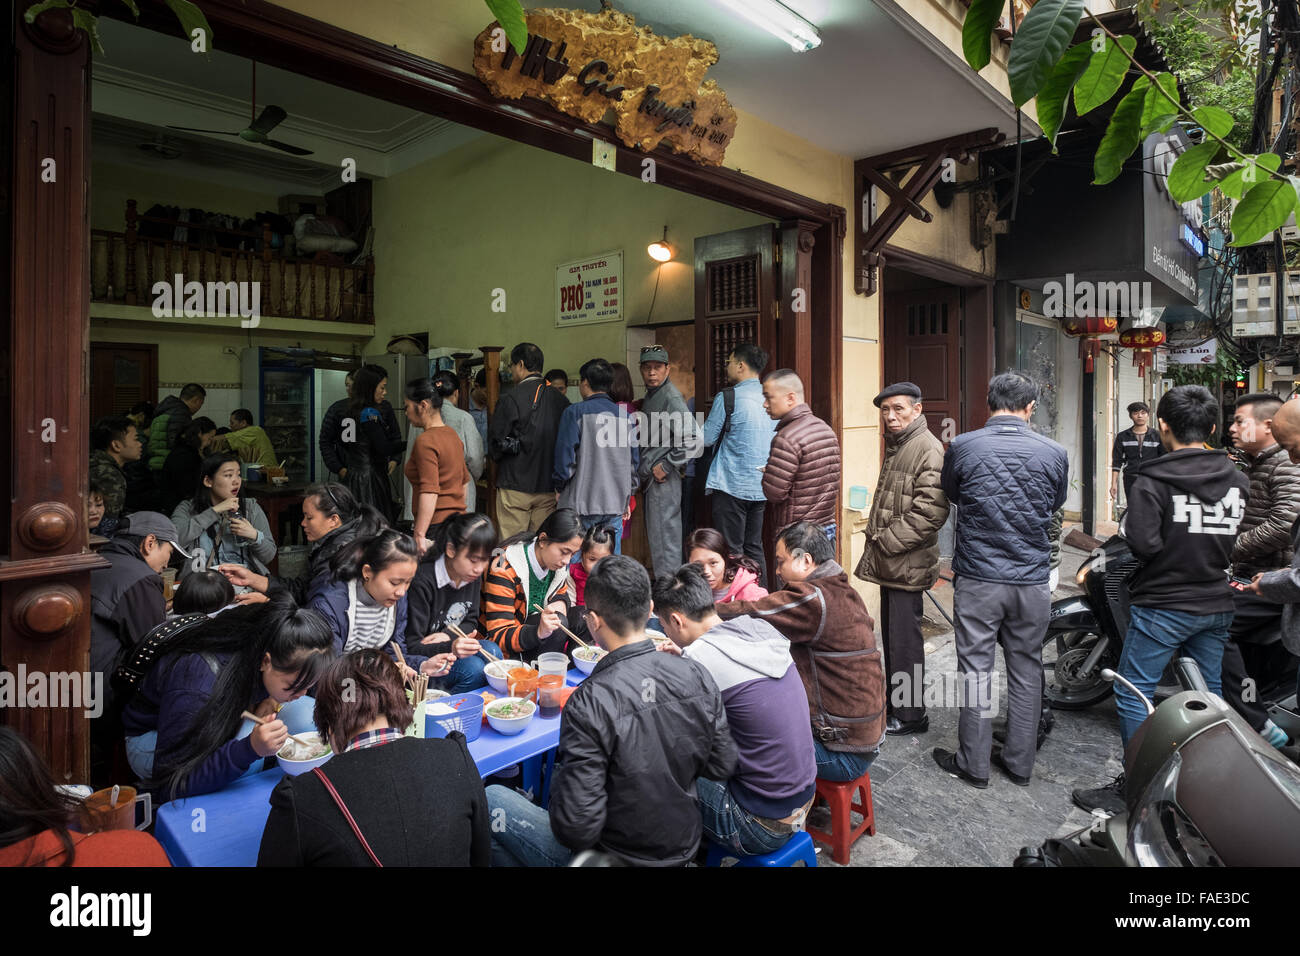 People queueing for their bowls of Pho Bo (beef noodle soup) at the iconic Pho Gia Truyen at 49 Bat Dan in Hanoi's Old Quarter. Stock Photo